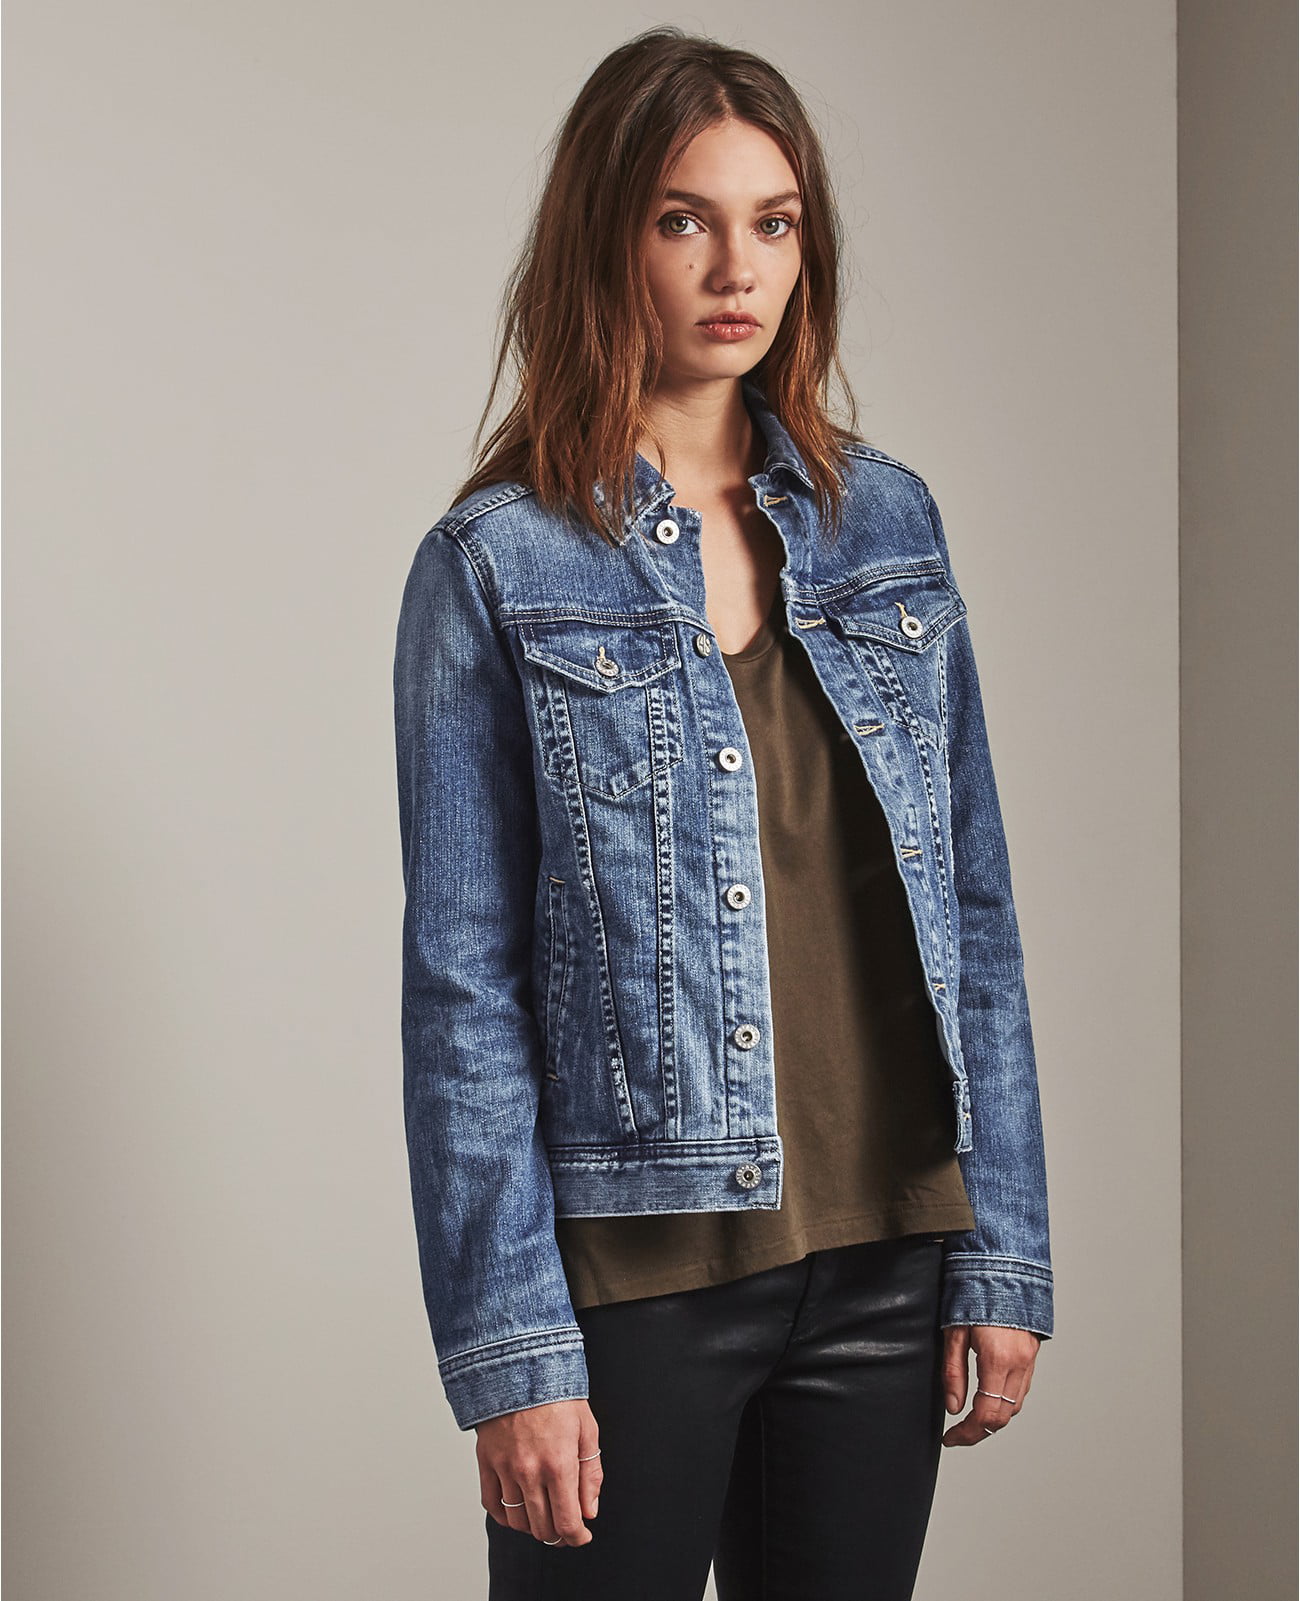 Ag LED Denim Jacket in 10 Years Magnetic Blue, US Small - Walmart.com